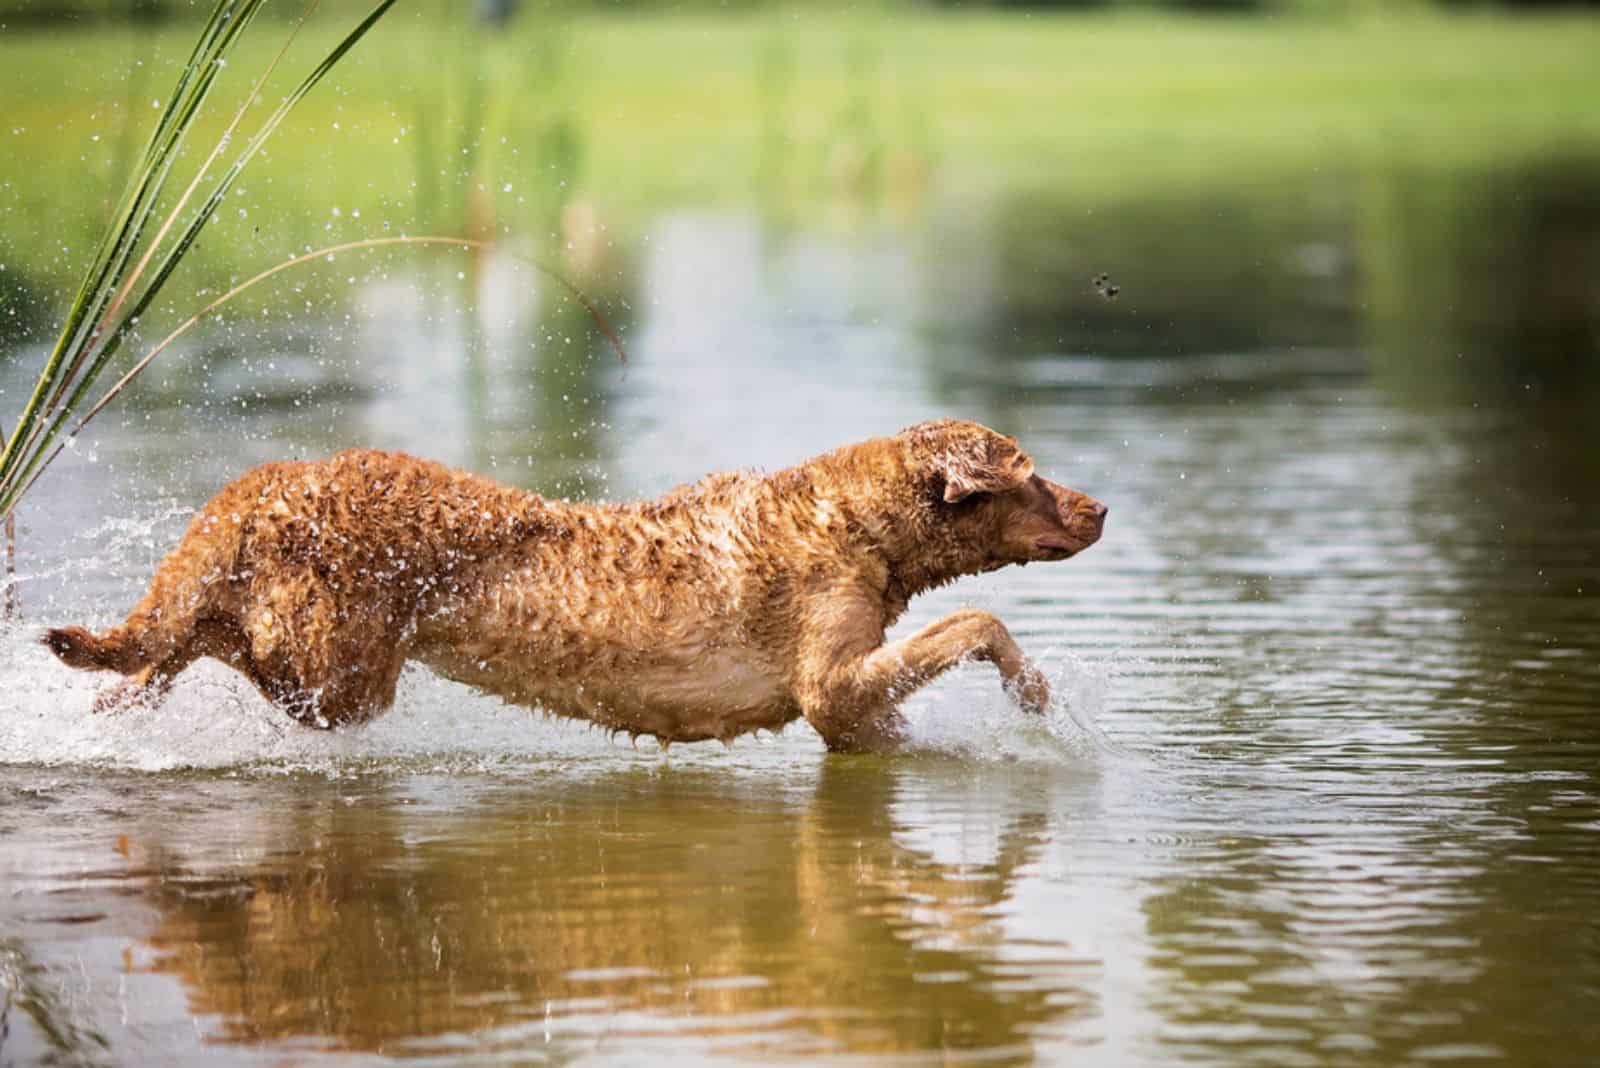 Chesapeake Bay Retriever Leaping In the Water